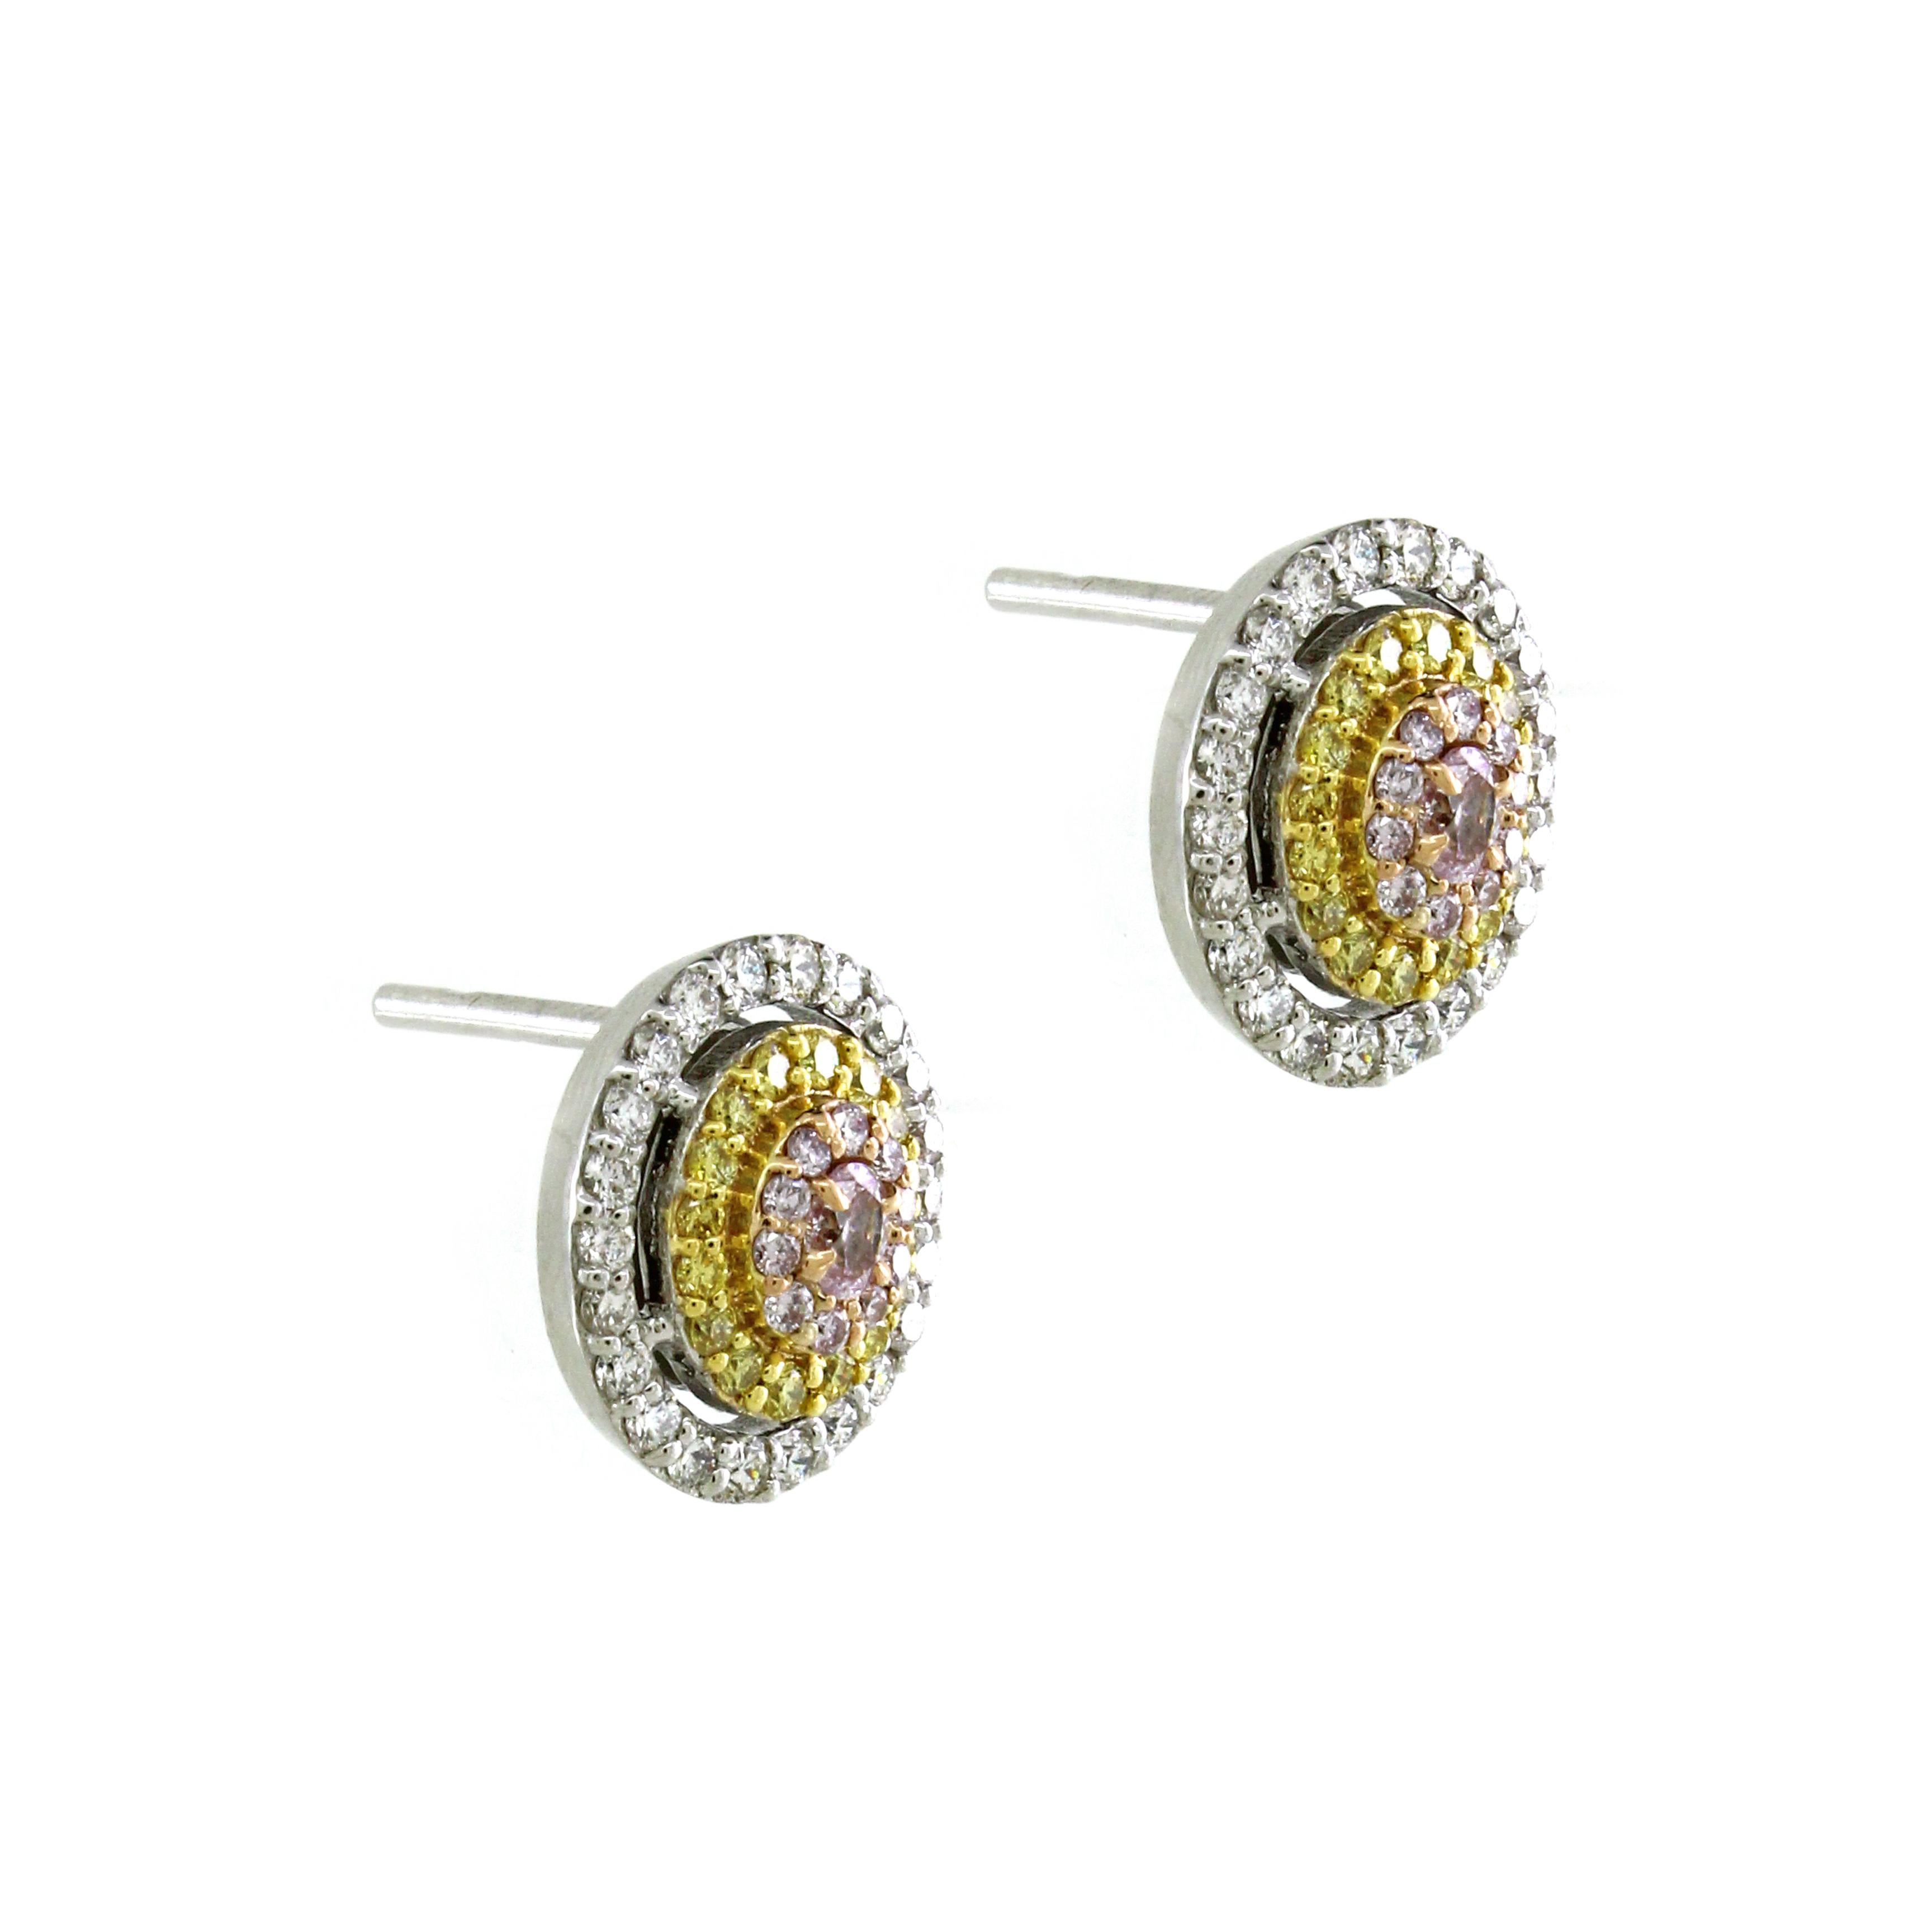 Introducing our exquisite Triple Halo Pink Diamond Stud Earrings, a stunning blend of elegance and sophistication. Crafted in luxurious 14K white gold, each earring weighs a delicate 3.65 grams, ensuring a comfortable and lightweight wear. At the